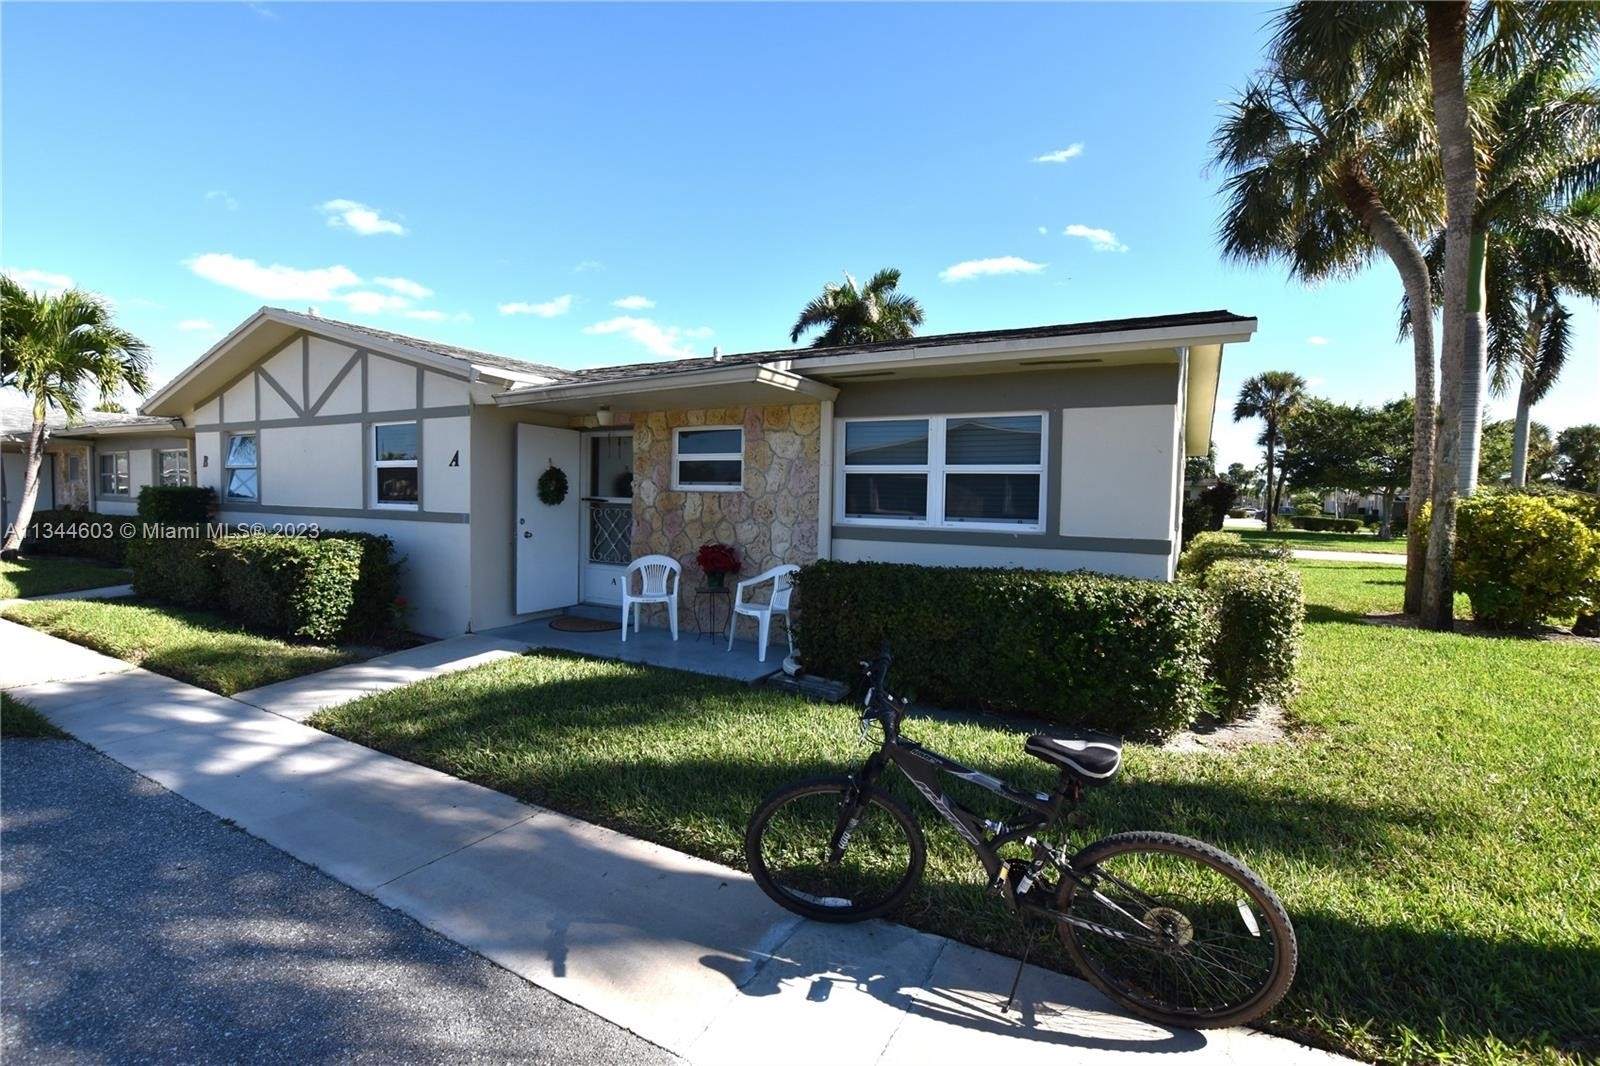 Property at 2515 Emory Dr W, A Cresthaven, West Palm Beach, FL 33415